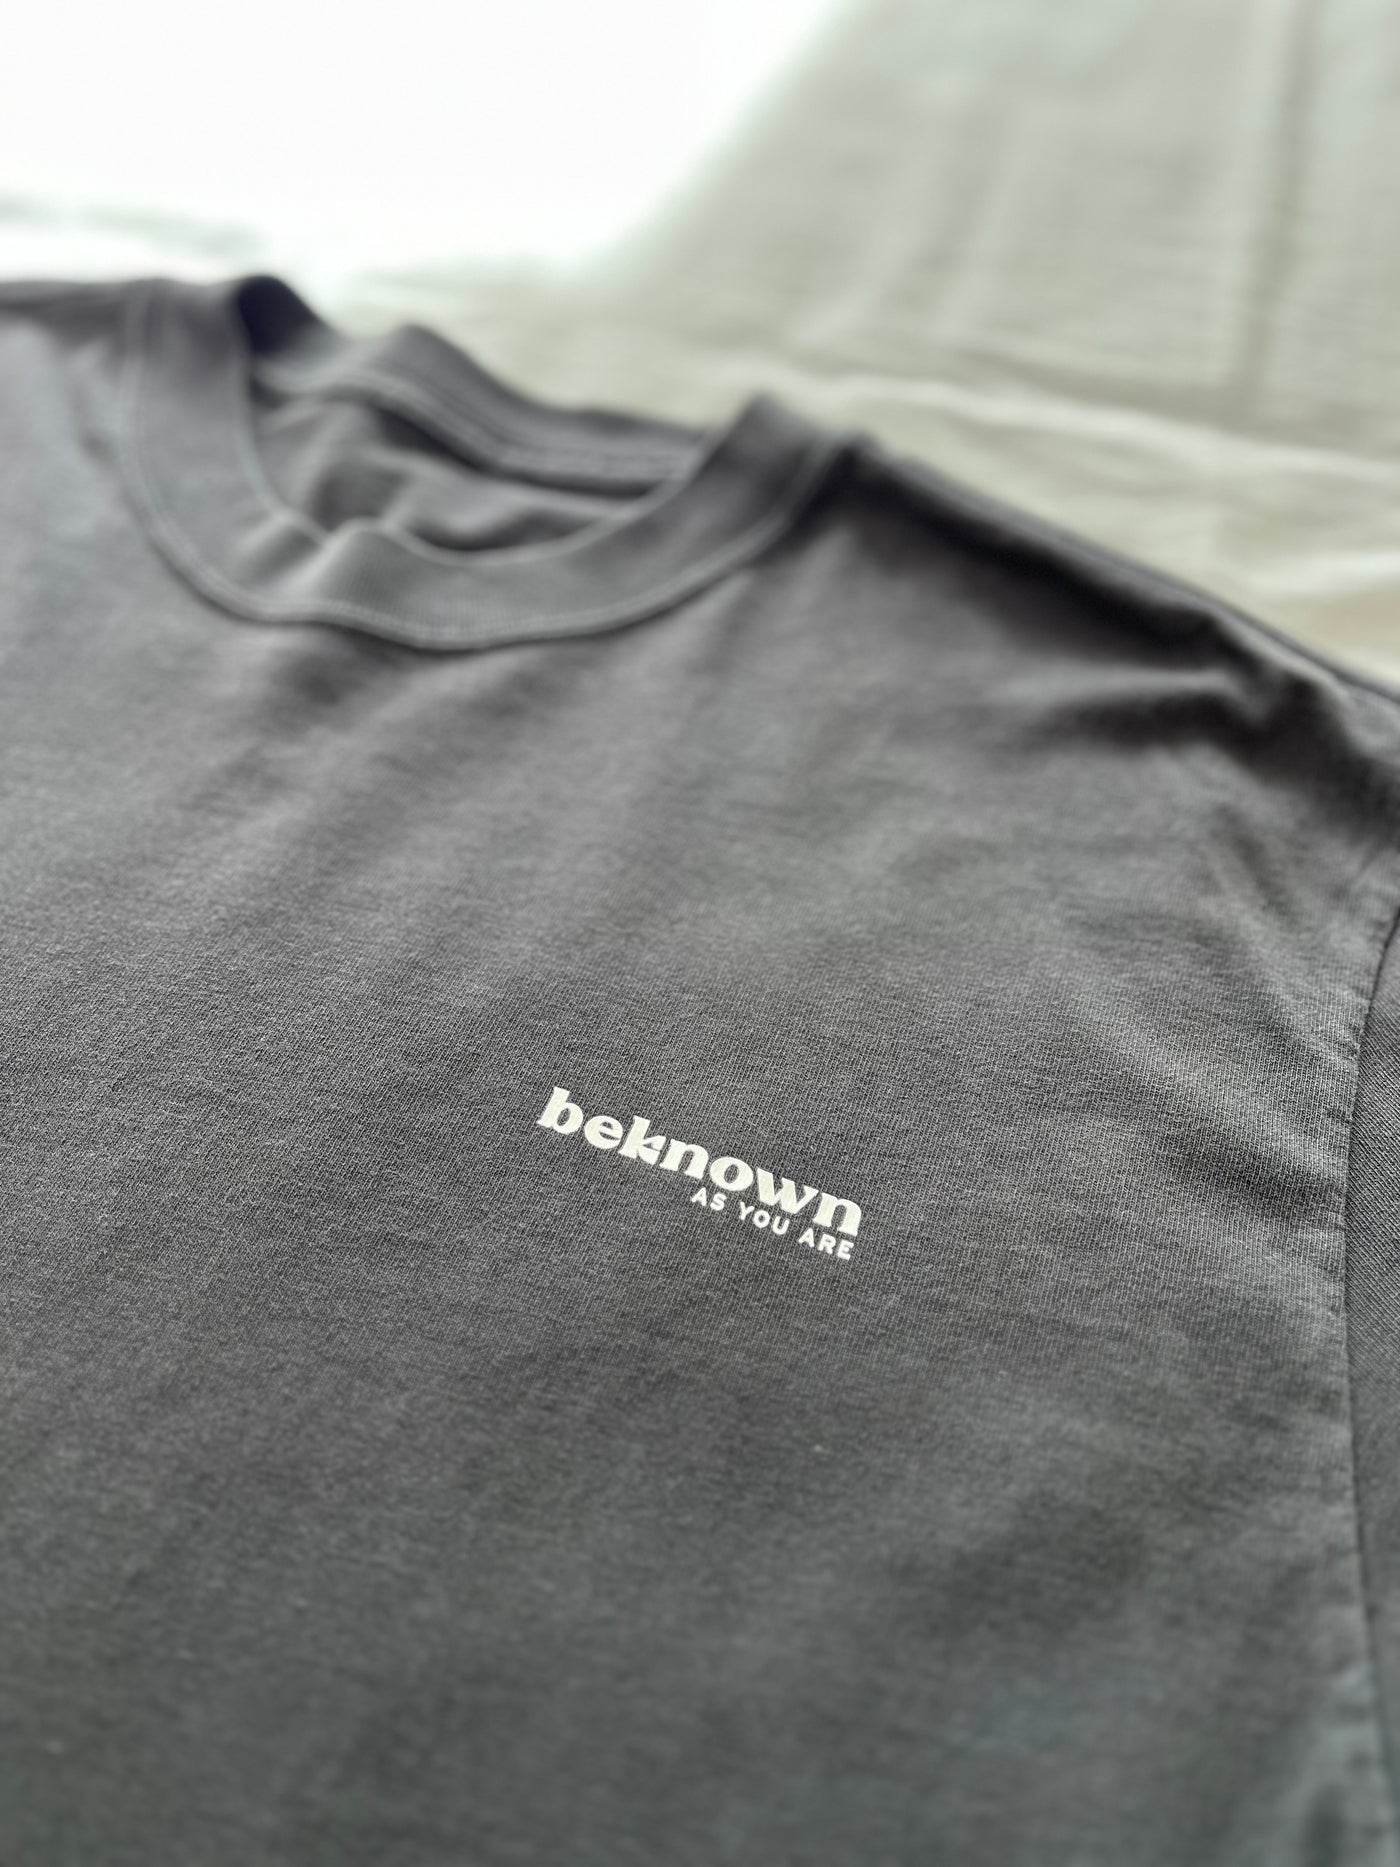 Heavy Faded T-Shirt | beknown, as you are.